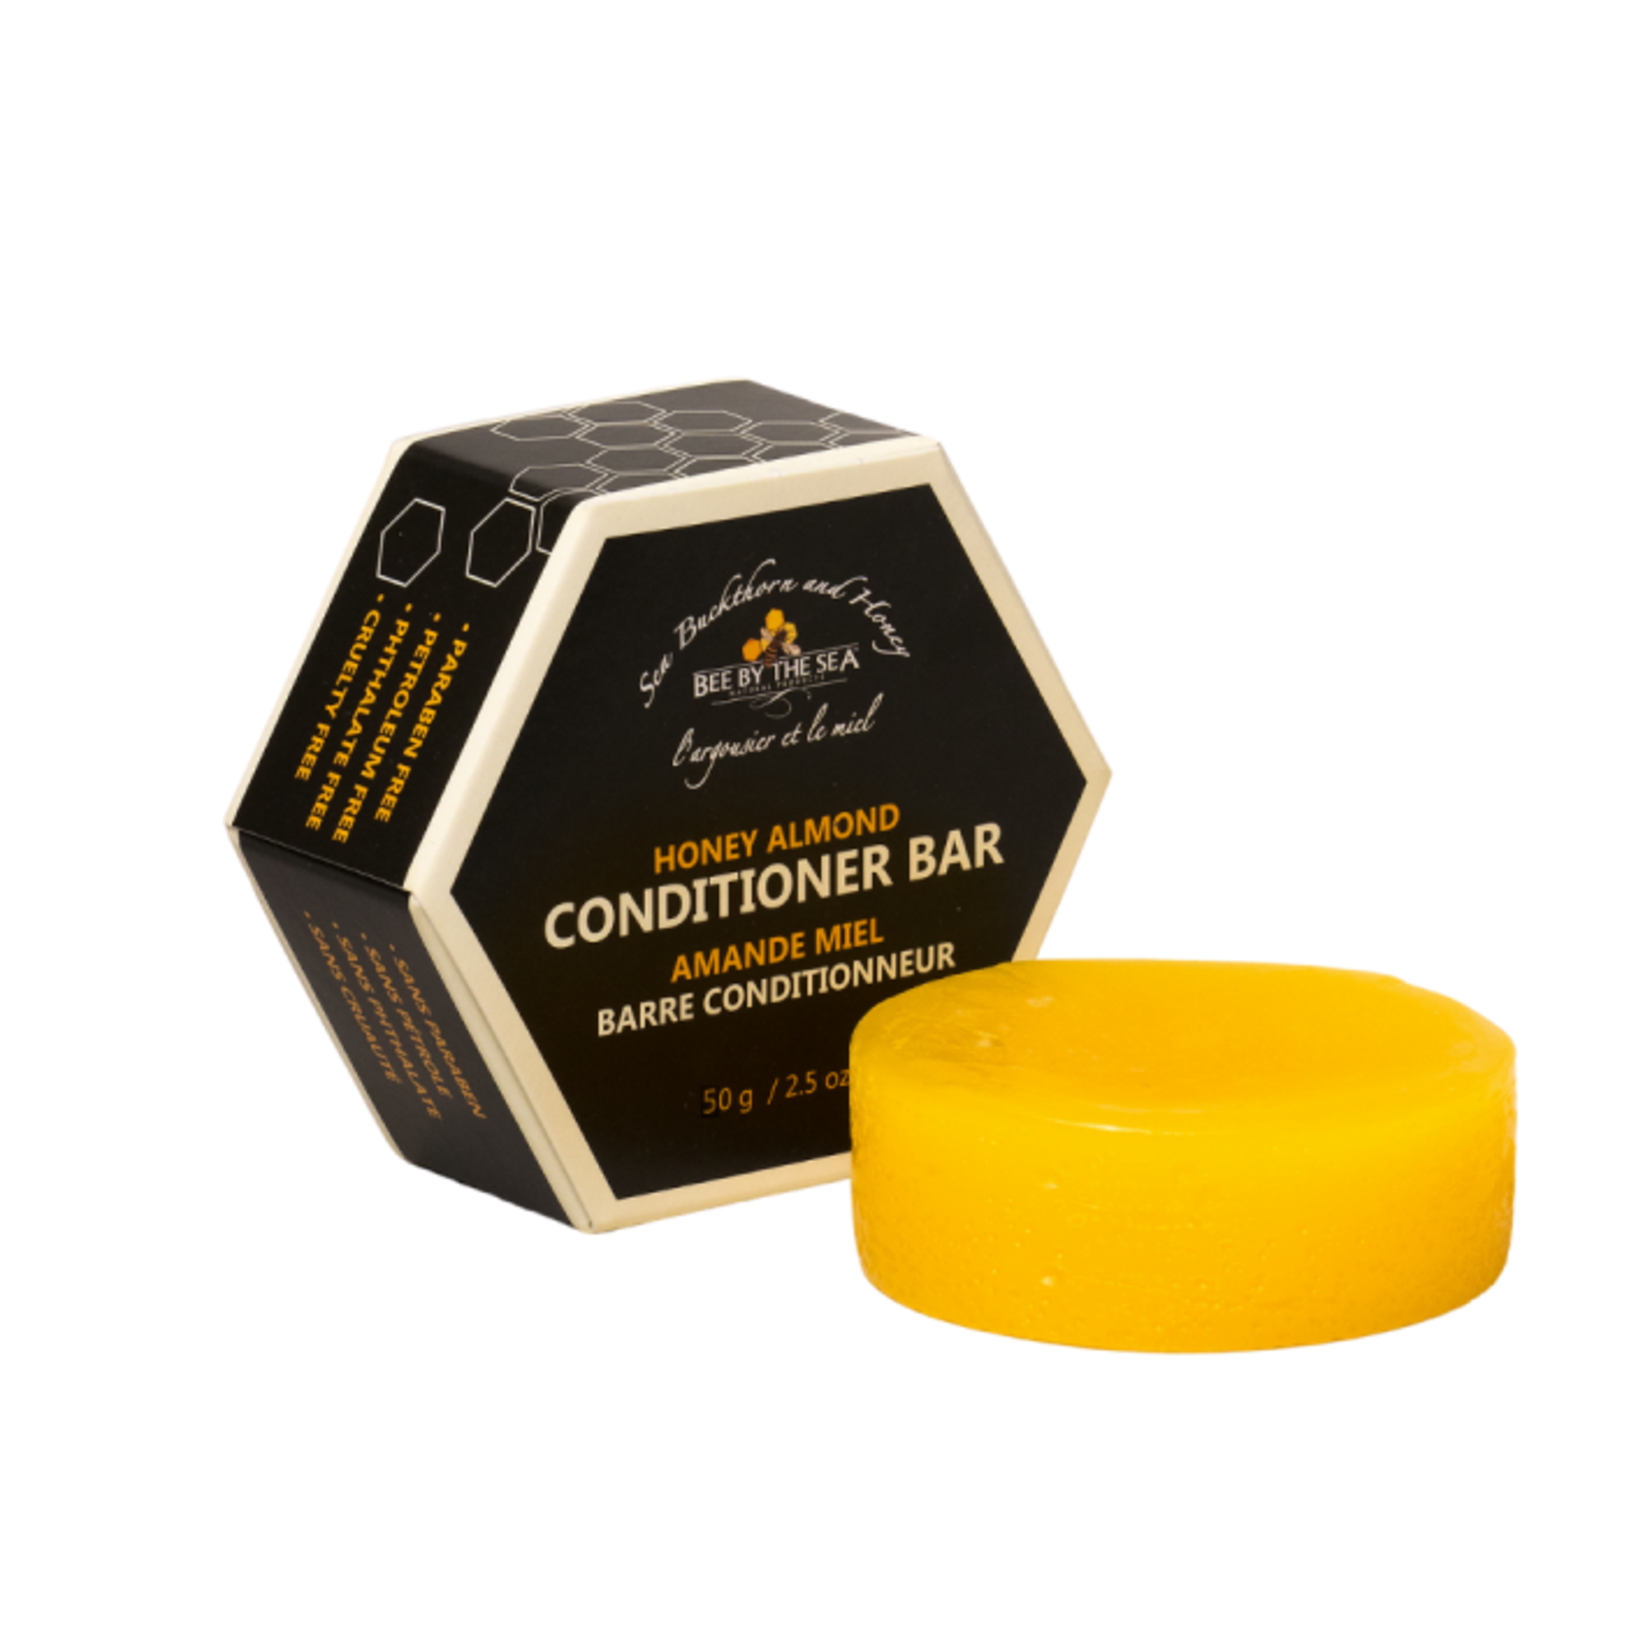 Bee by the Sea Conditioner Bar